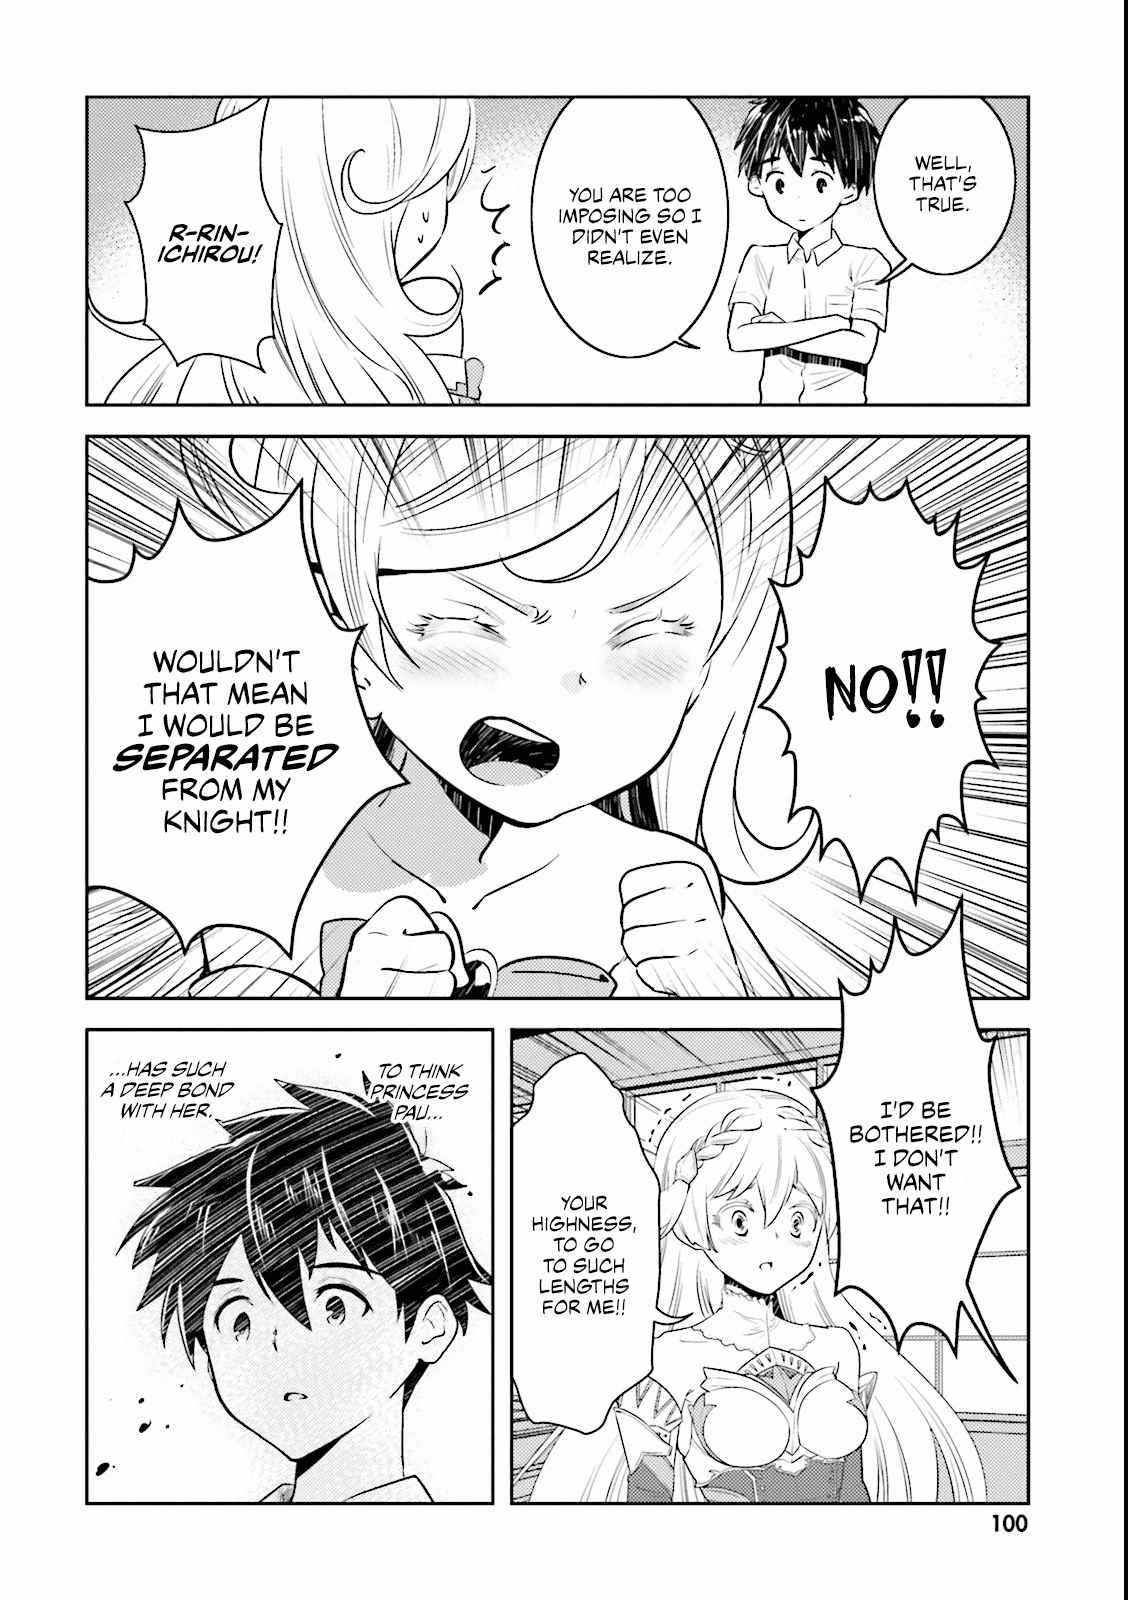 Why not go to JUSCO with me, Valkyrie? Vol. 1 Ch. 5